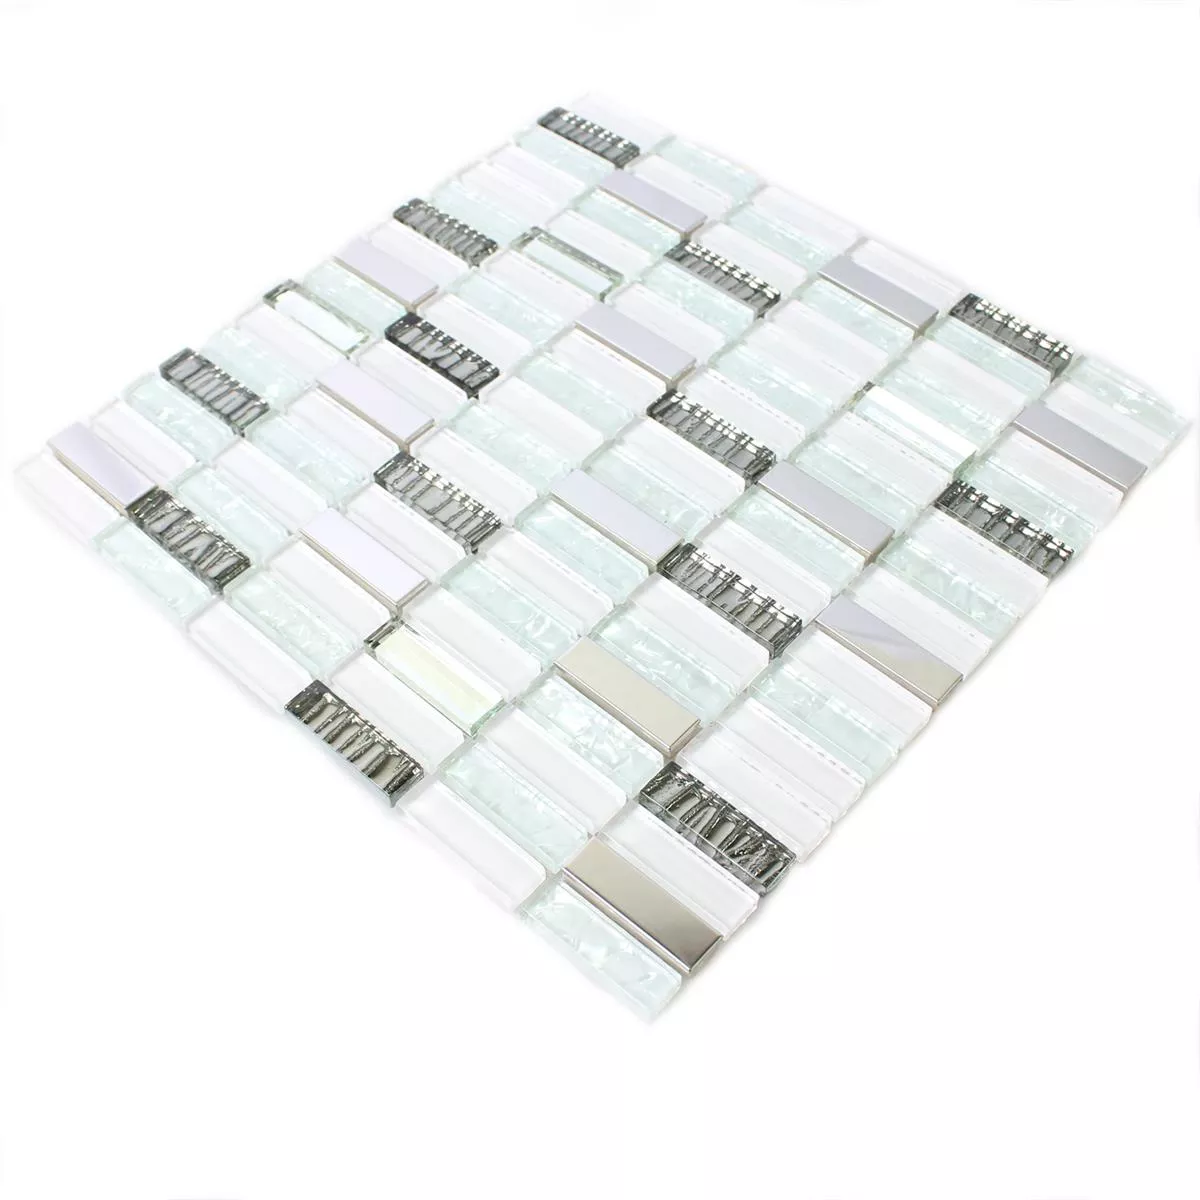 Sample Mosaic Tiles Glass Stainless Steel White Mix